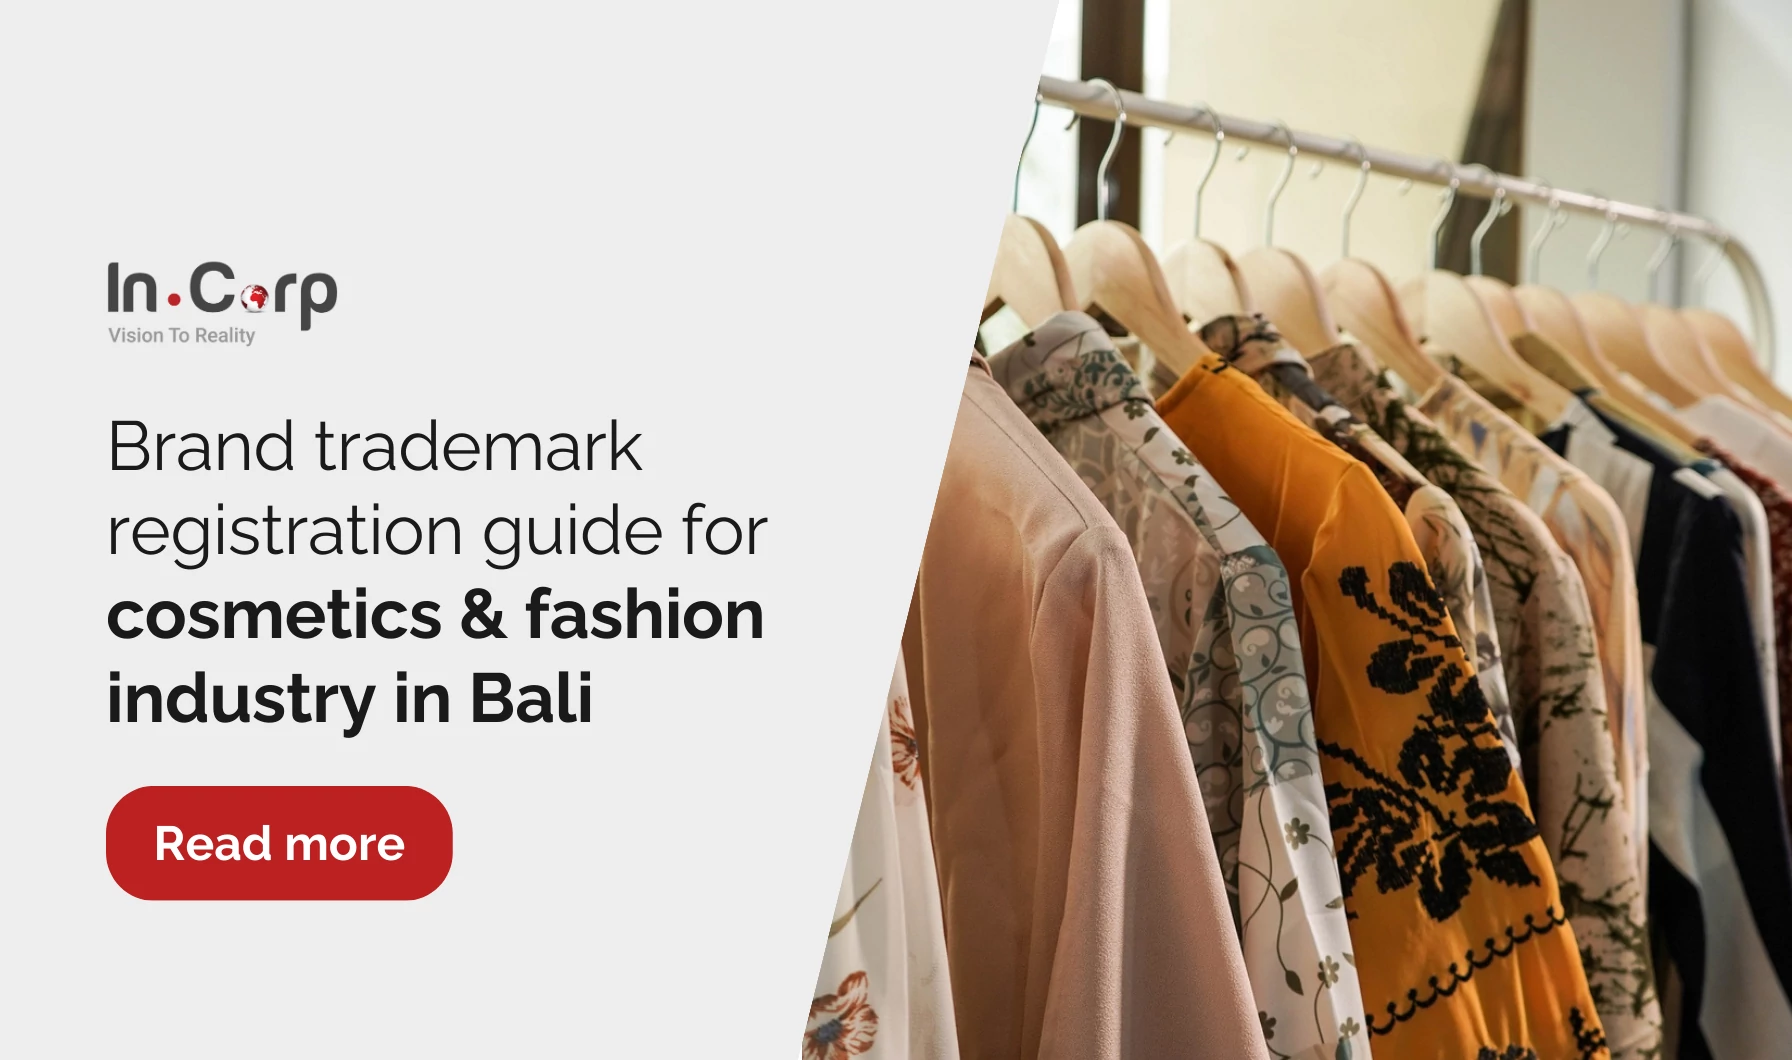 The importance of brand trademark registration in Bali